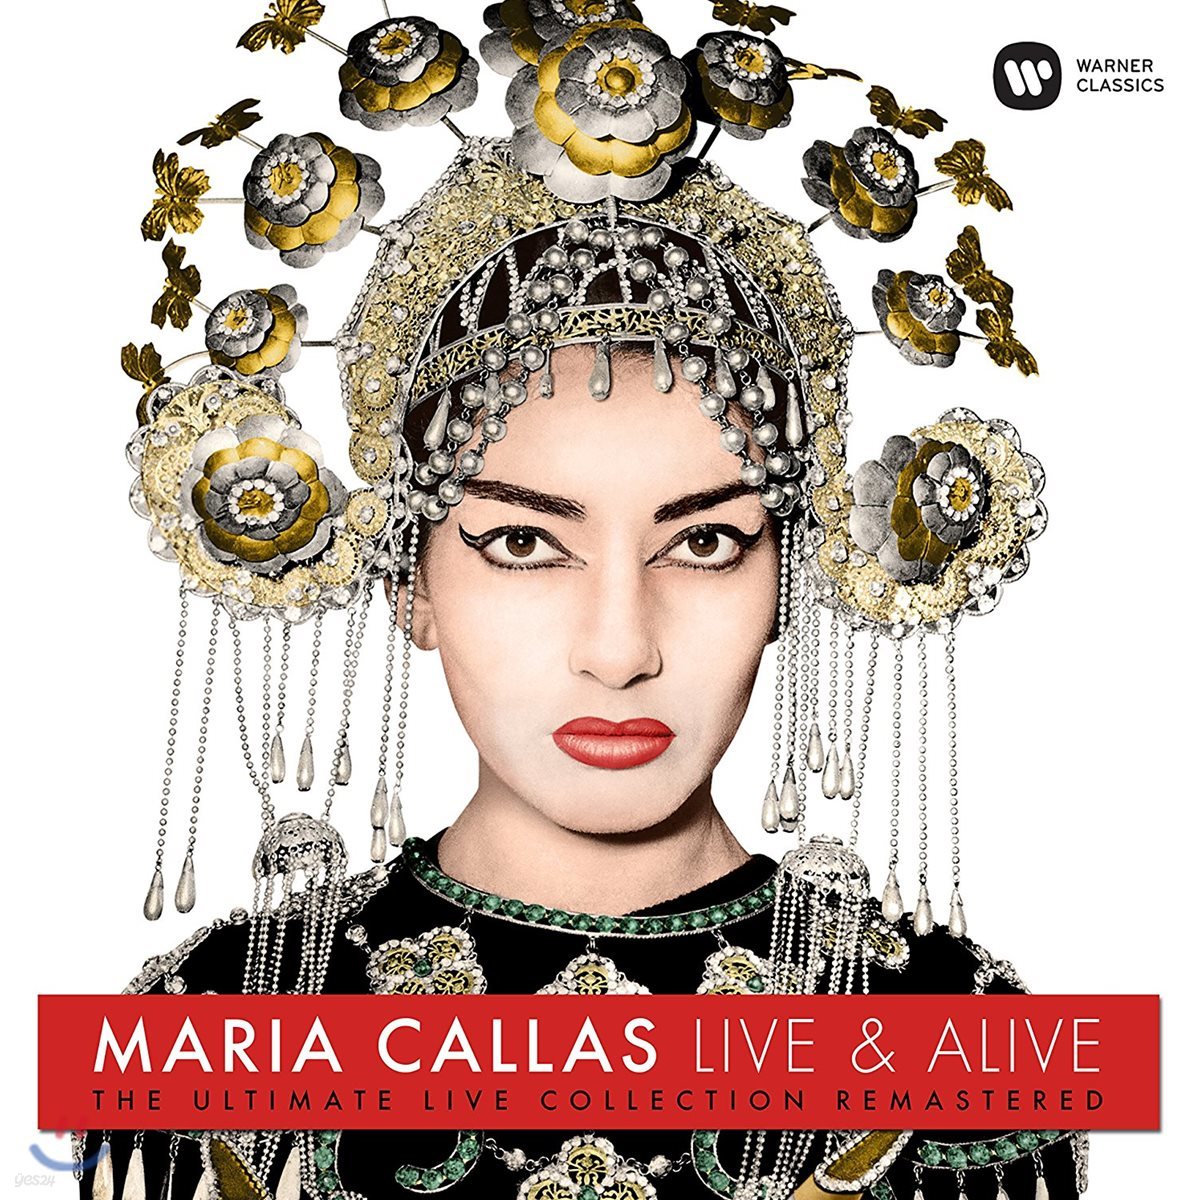 Maria Callas 마리아 칼라스 라이브 컬렉션 (Live &amp; Alive - The Ultimate Live Collection Remastered) [LP]